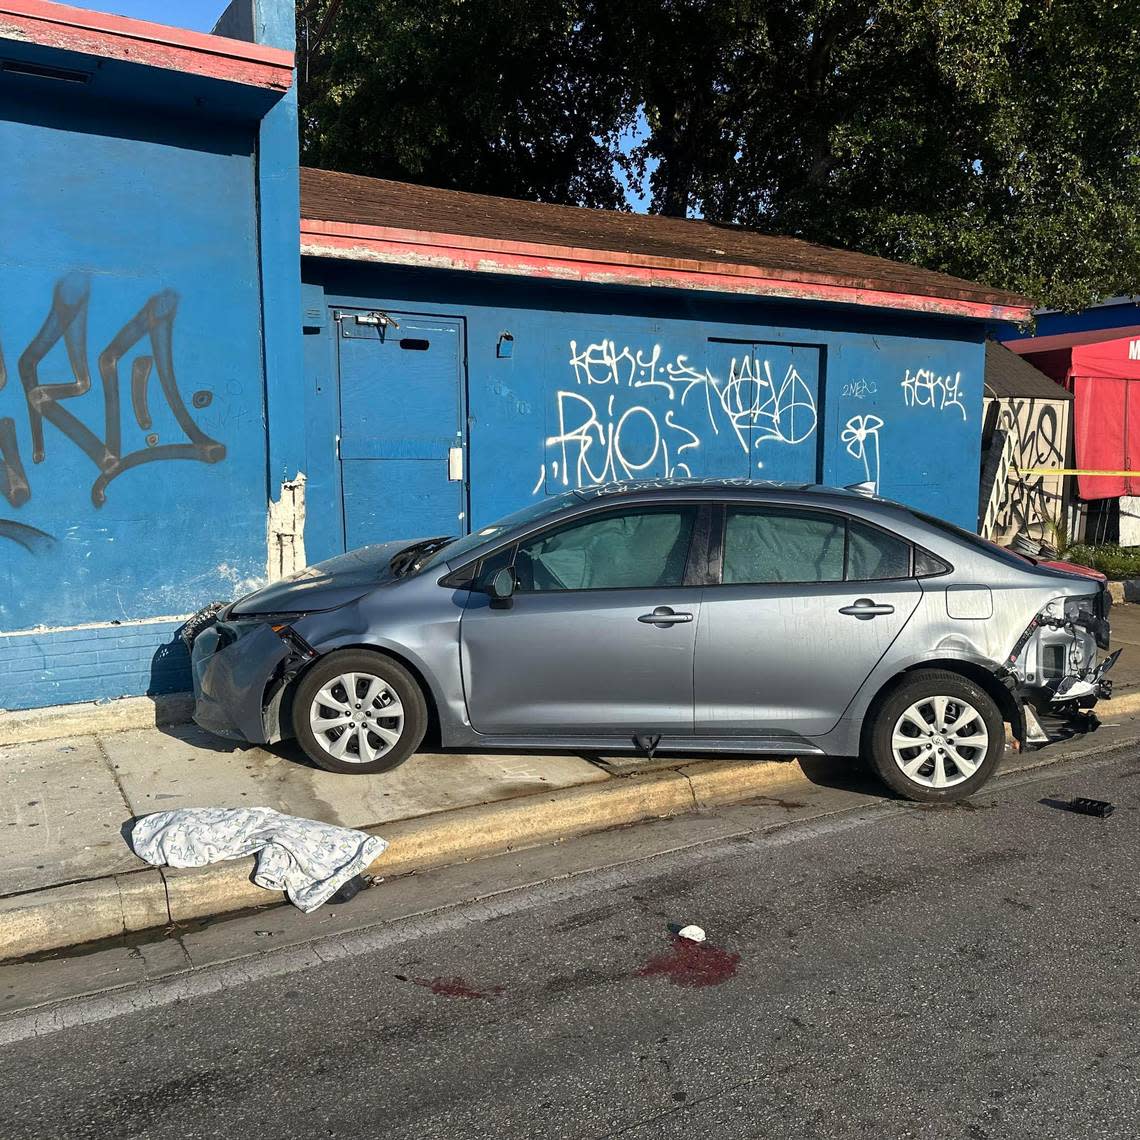 A woman standing on a sidewalk was critically injured when an 18-wheeler smacked a car from behind, causing the smaller vehicle to jump the curb and hit her near the Northwest 27th drawbridge in Miami on Wednesday, March 24, 2024, police said.